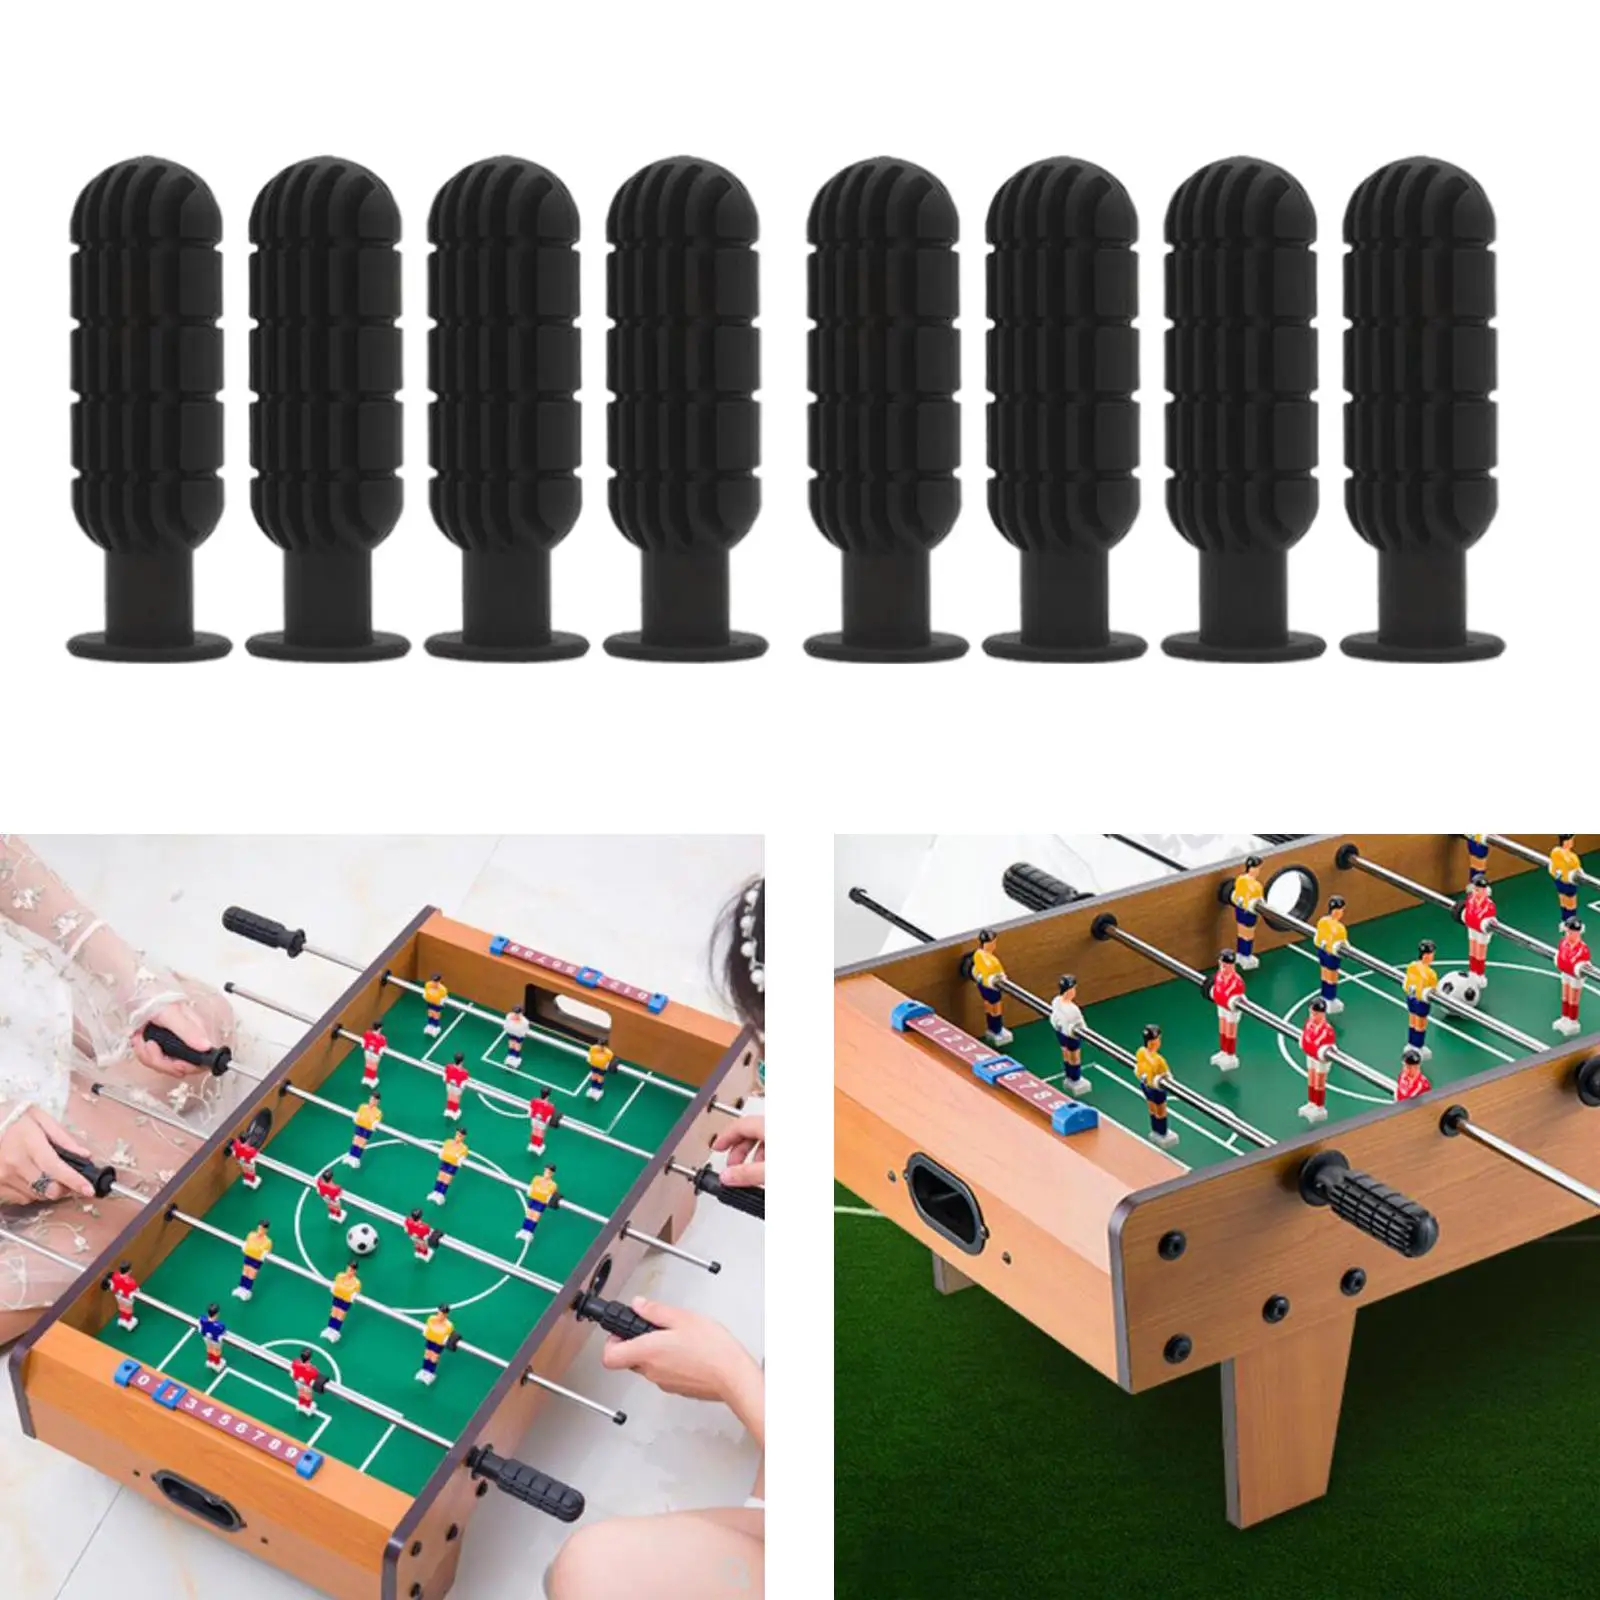 Foosball Handle Grips for Foosball Table, Table Soccer Foosball Accessories for 11/2 Inch Foosball Rods, 8 Pack